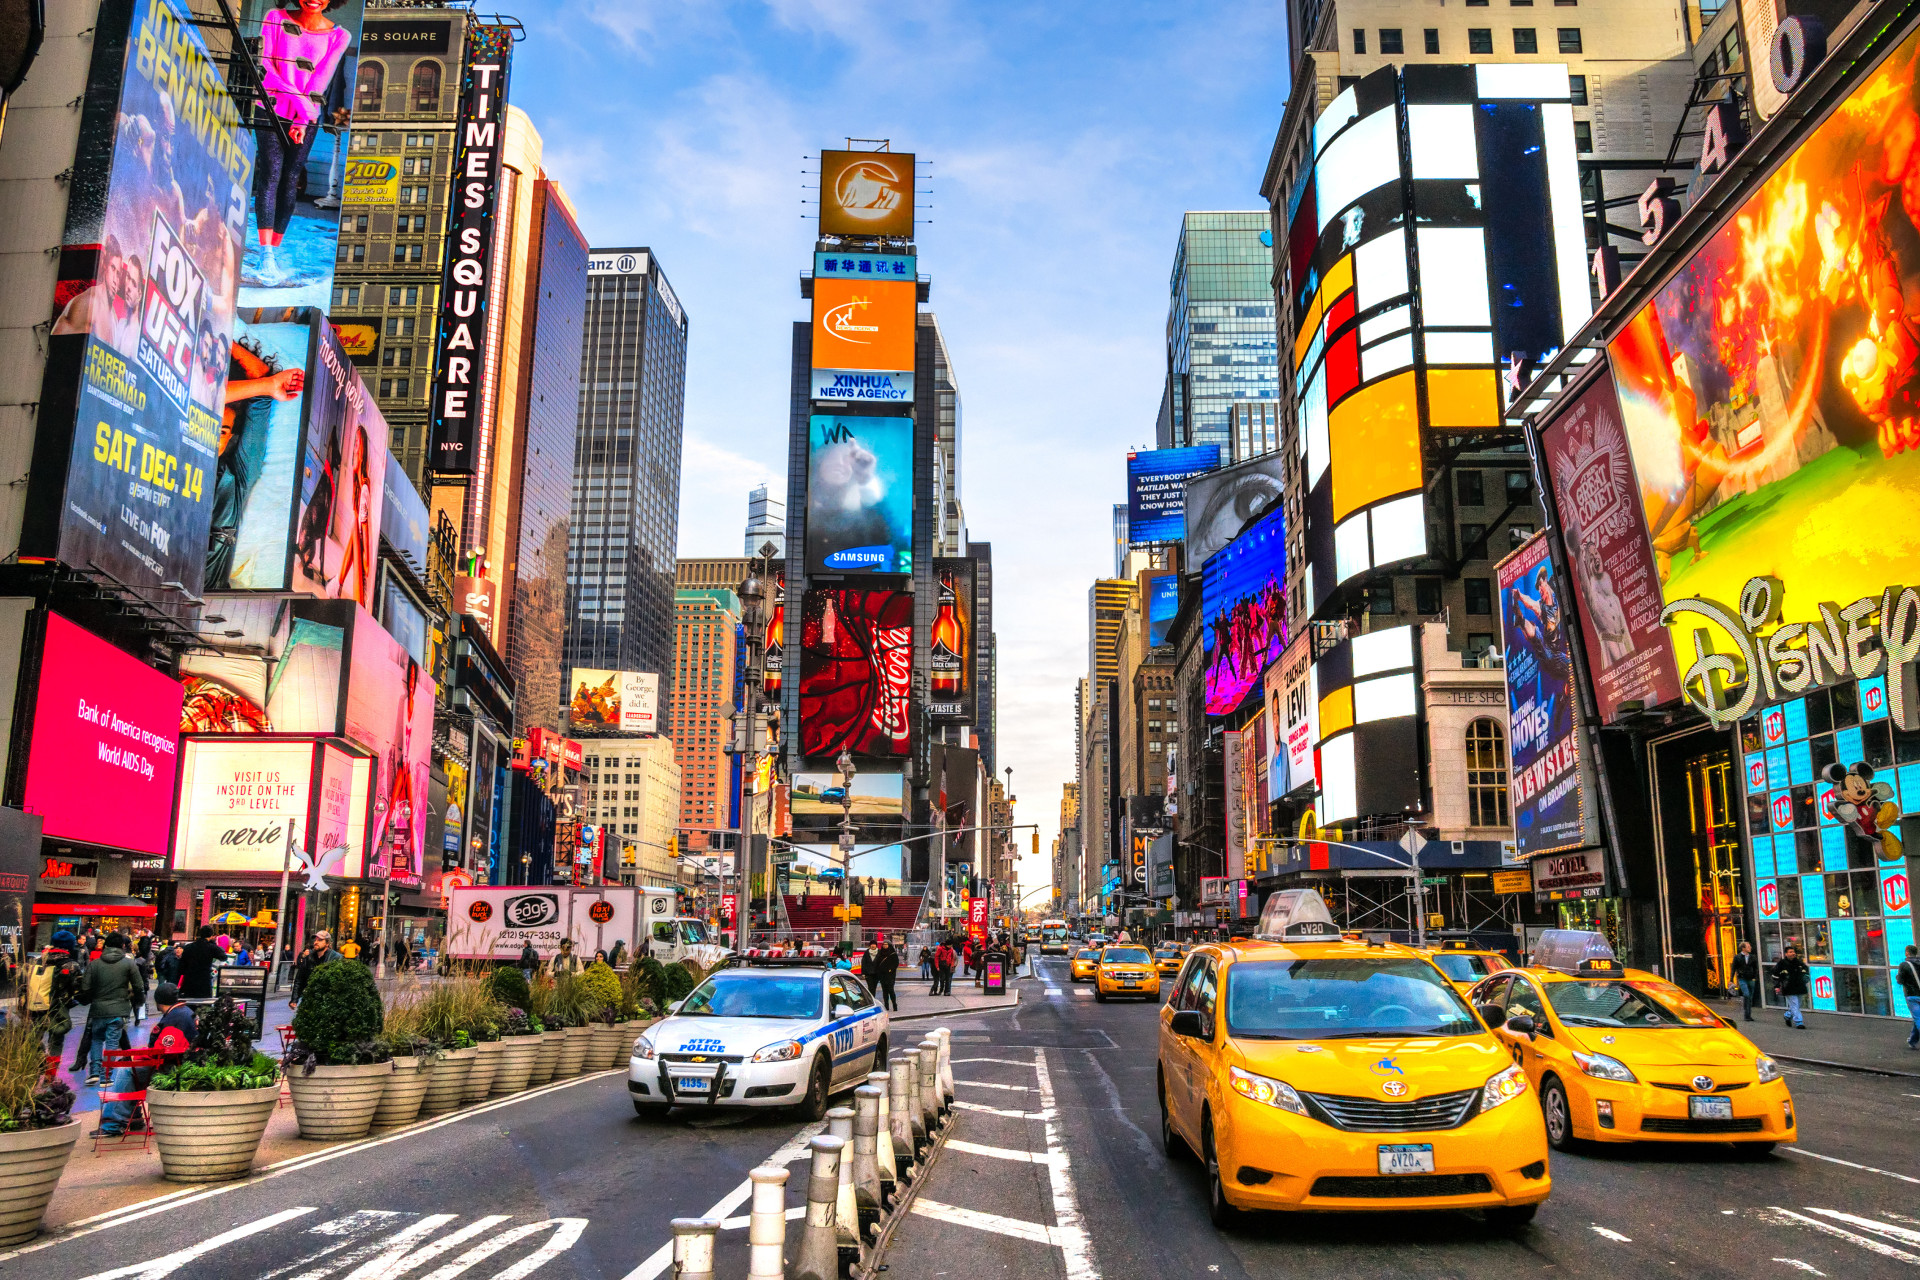 Lots of tourists head to the world famous Times Square thoroughfare. <p><a href="https://www.msn.com/en-sg/community/channel/vid-7xx8mnucu55yw63we9va2gwr7uihbxwc68fxqp25x6tg4ftibpra?cvid=94631541bc0f4f89bfd59158d696ad7e">Follow us and access great exclusive content every day</a></p>